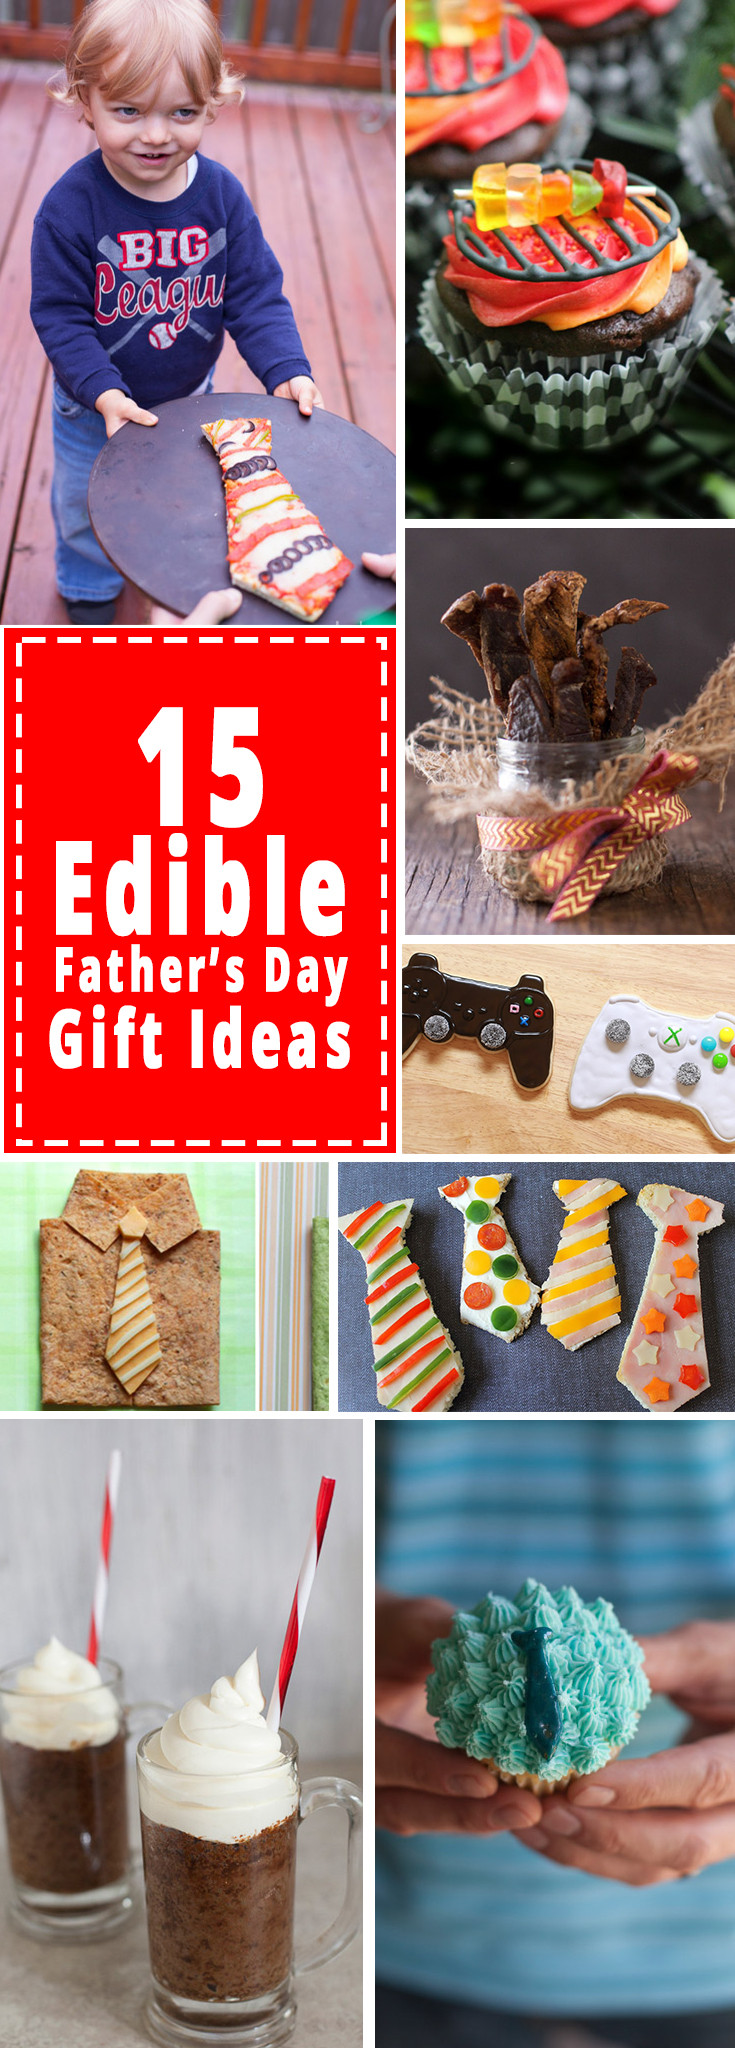 Edible Mother's Day Gifts
 15 Edible Father s Day Gifts that Dad Will Love